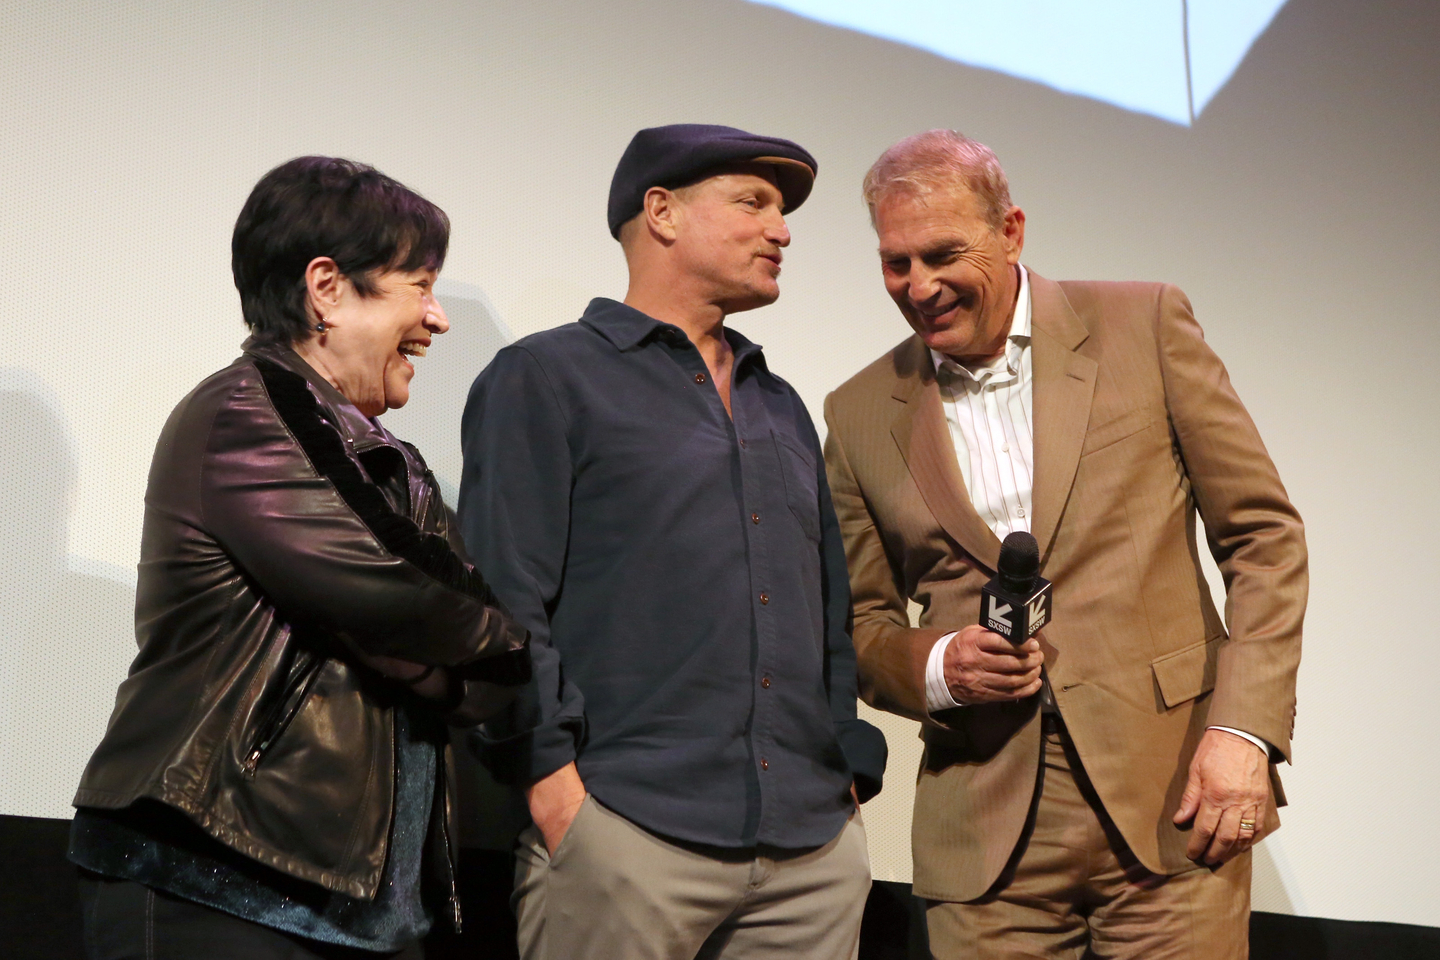 (L-R) Kathy Bates, Woody Harrelson, and Kevin Costner at The Highwaymen World Premiere – Photo by Travis P Ball/Getty Images for SXSW